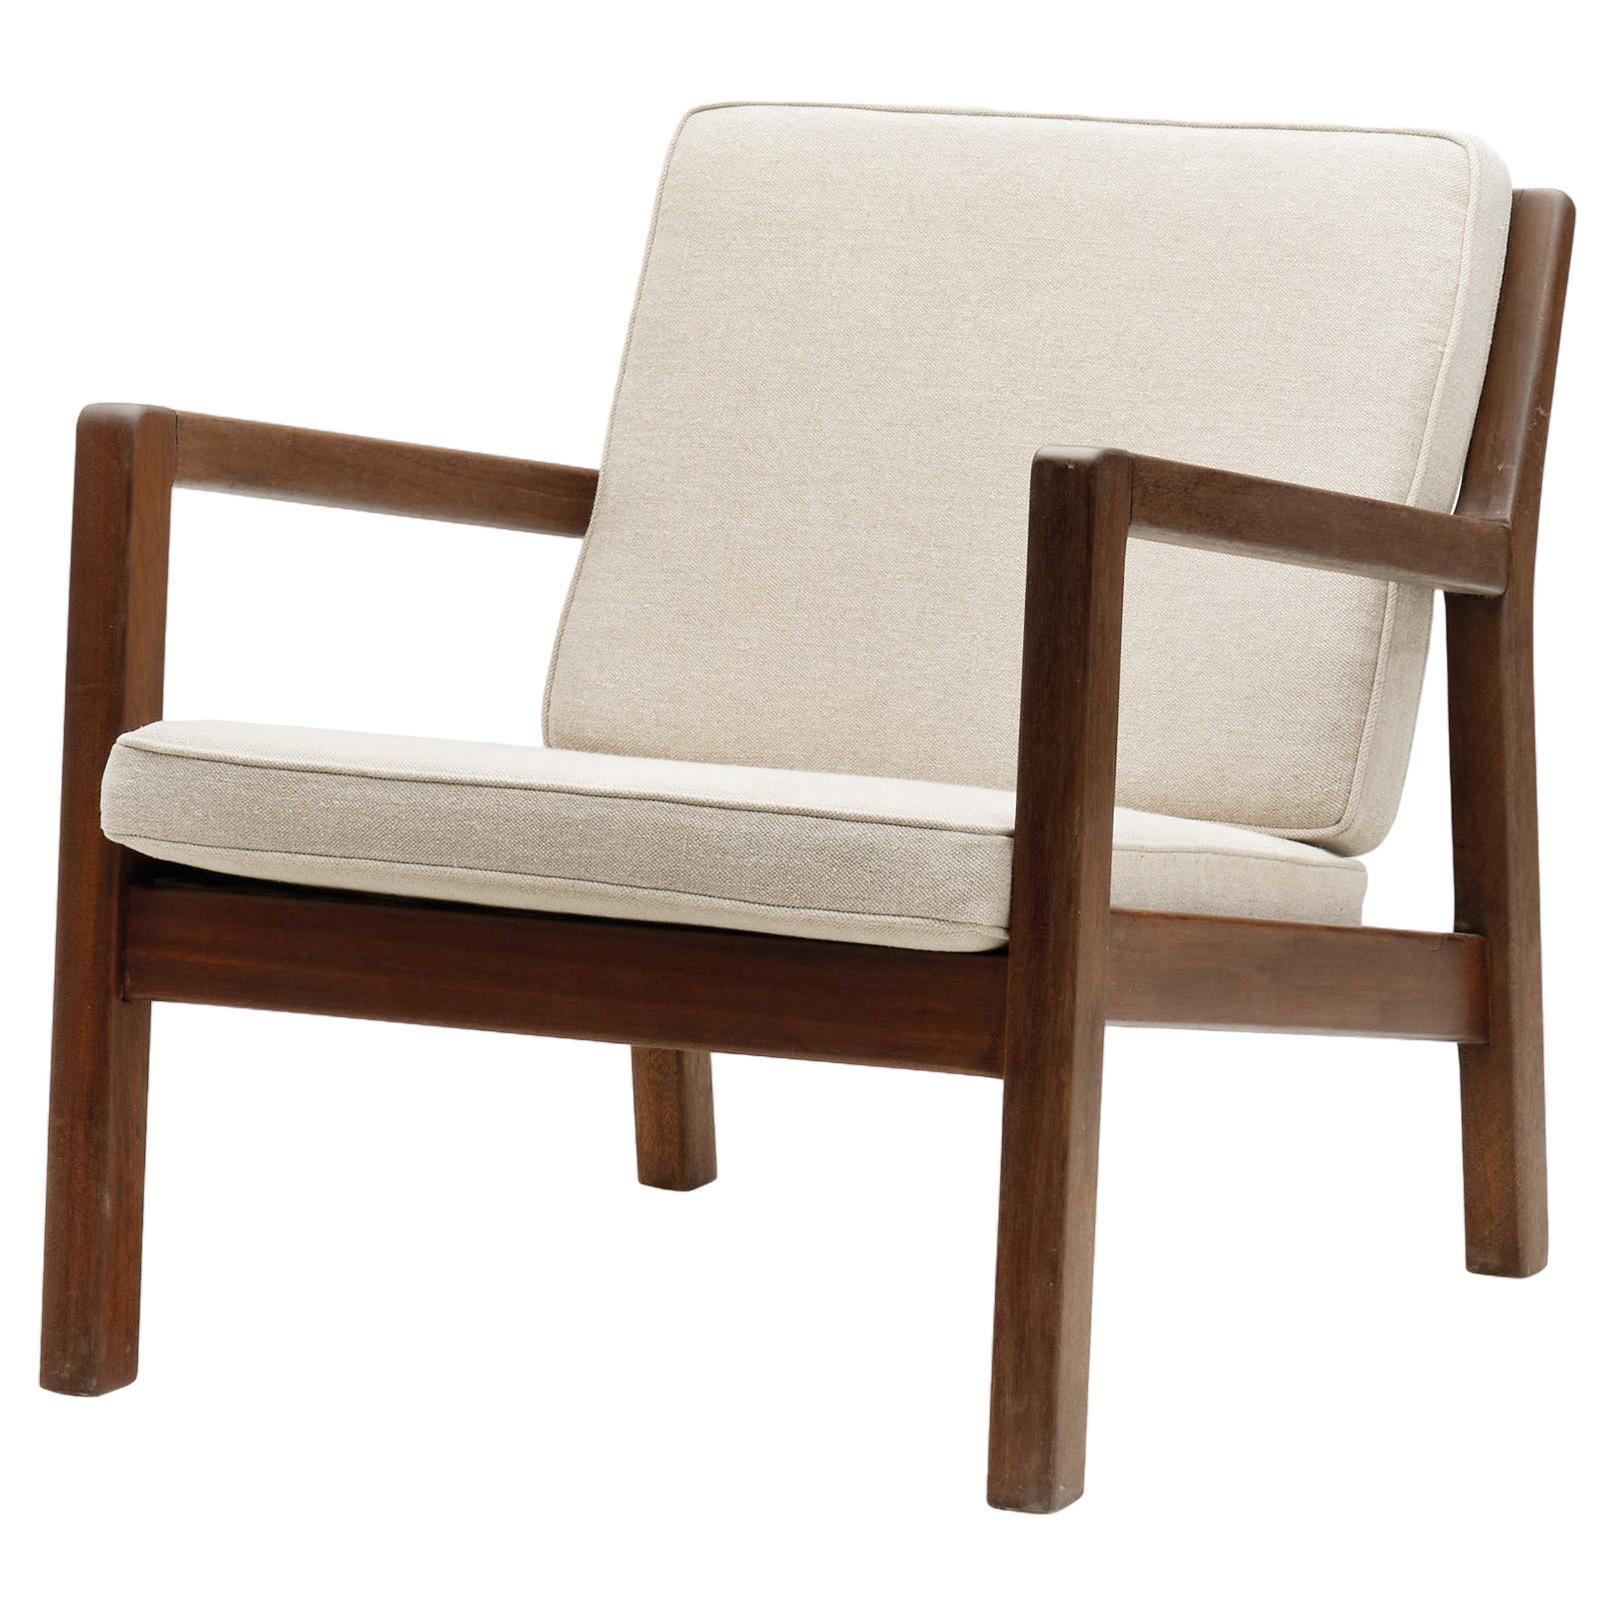 "Rialto" Chair by Carl Gustaf Hiort af Ornäs for Puunveisto Oy, Finland 1950s For Sale